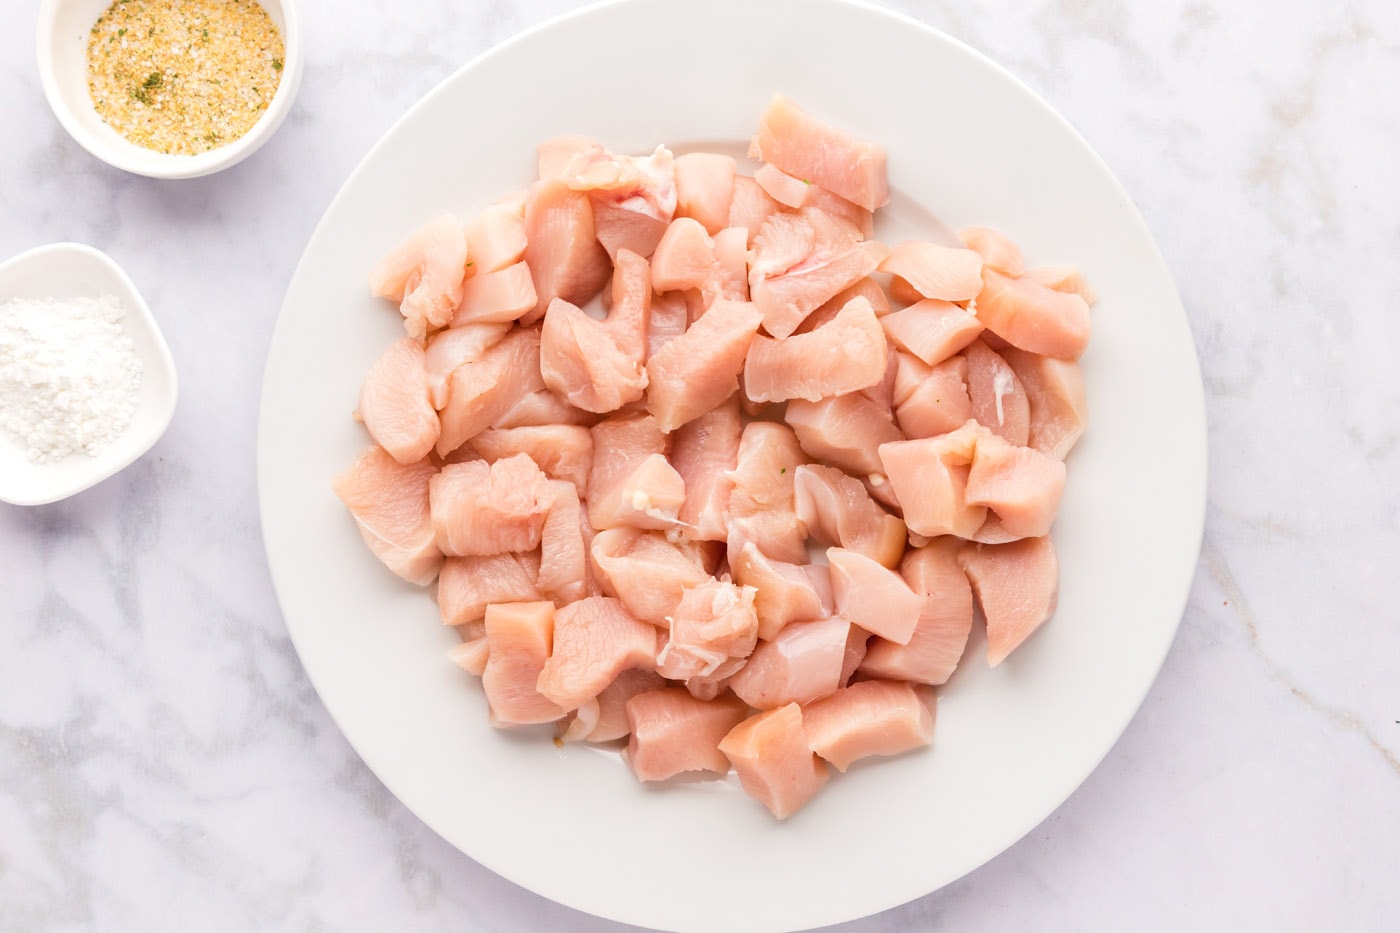 boneless skinless chicken breasts chopped into bite sized pieces